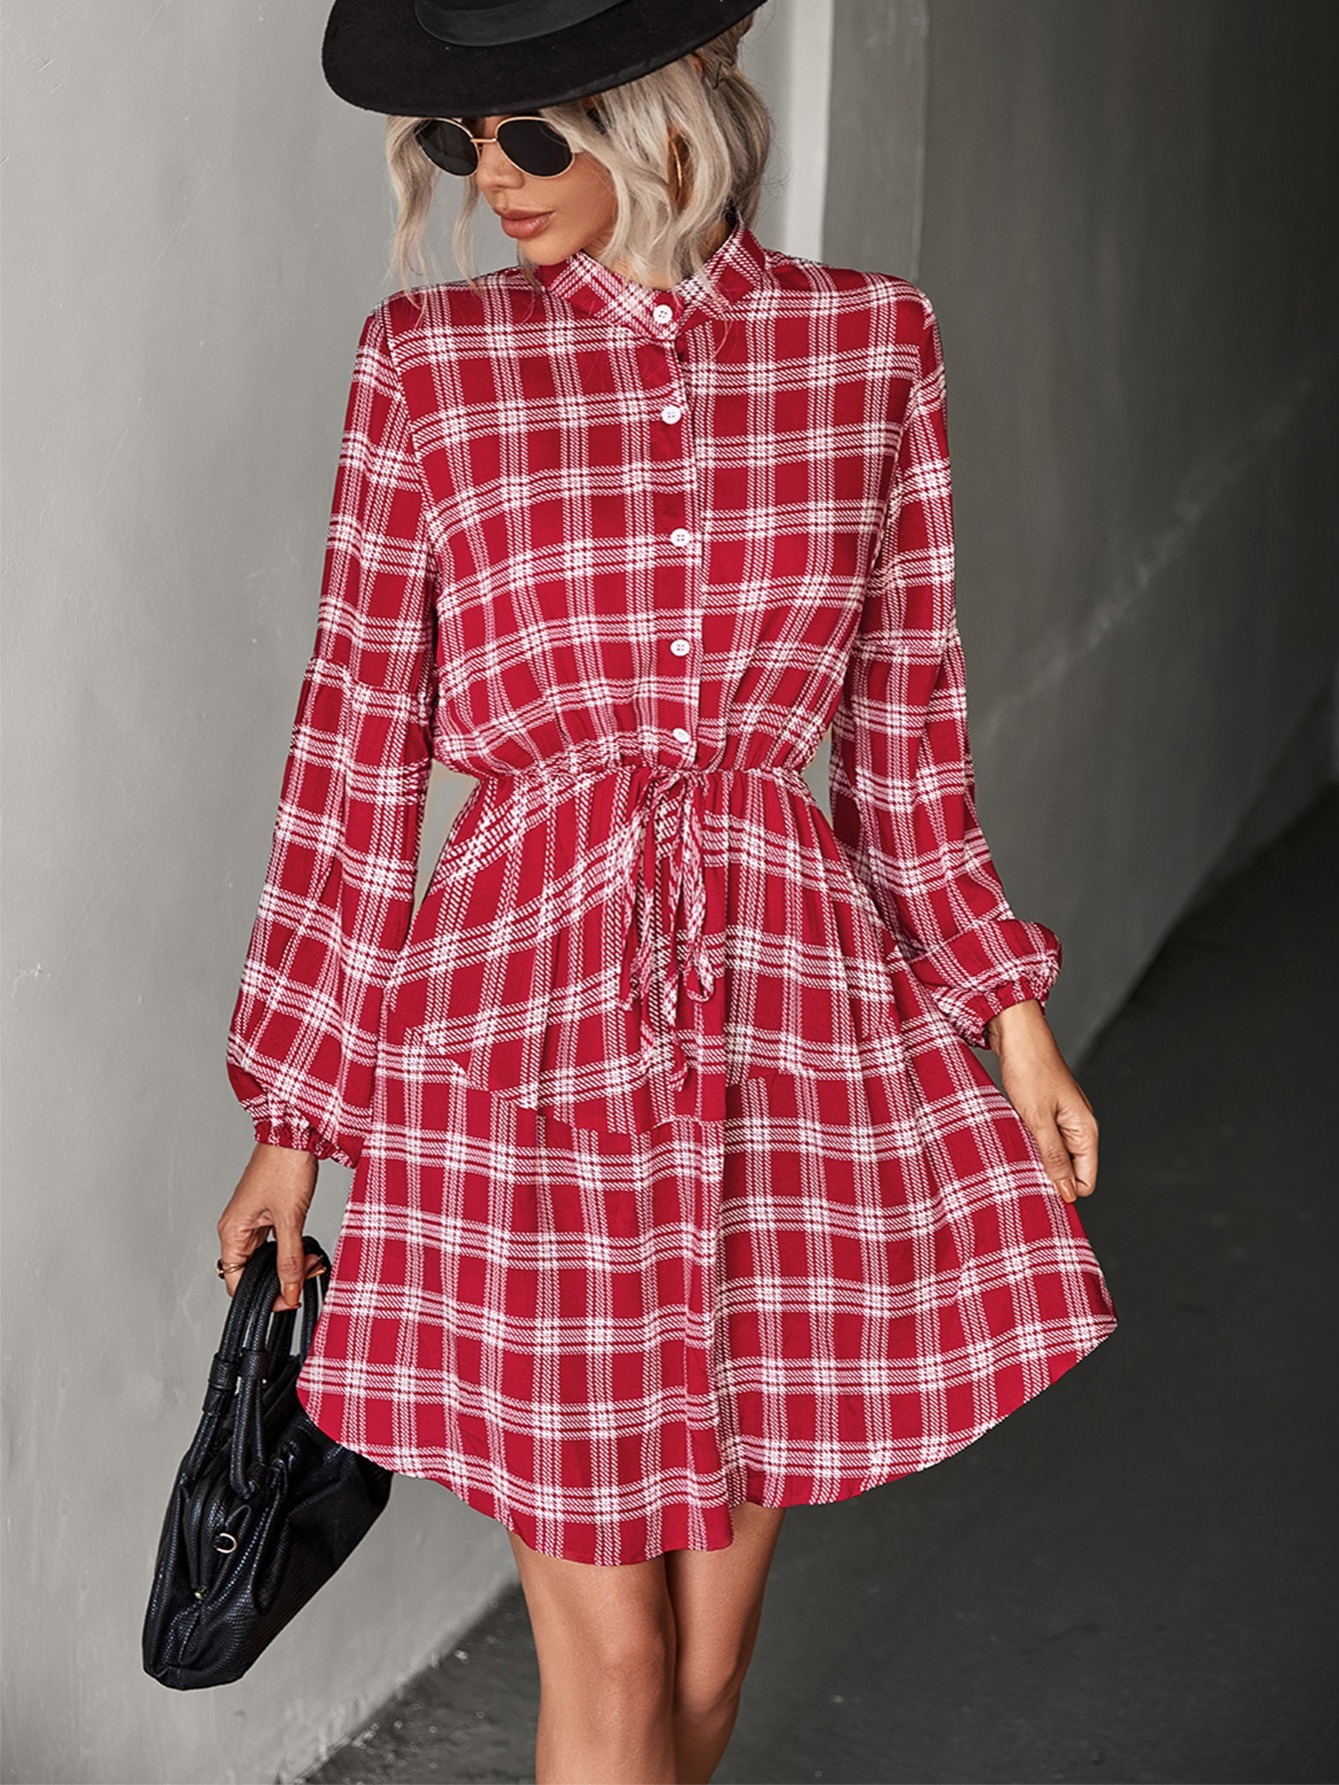 The Shirt Dress You Need Now - The Girl from Panama